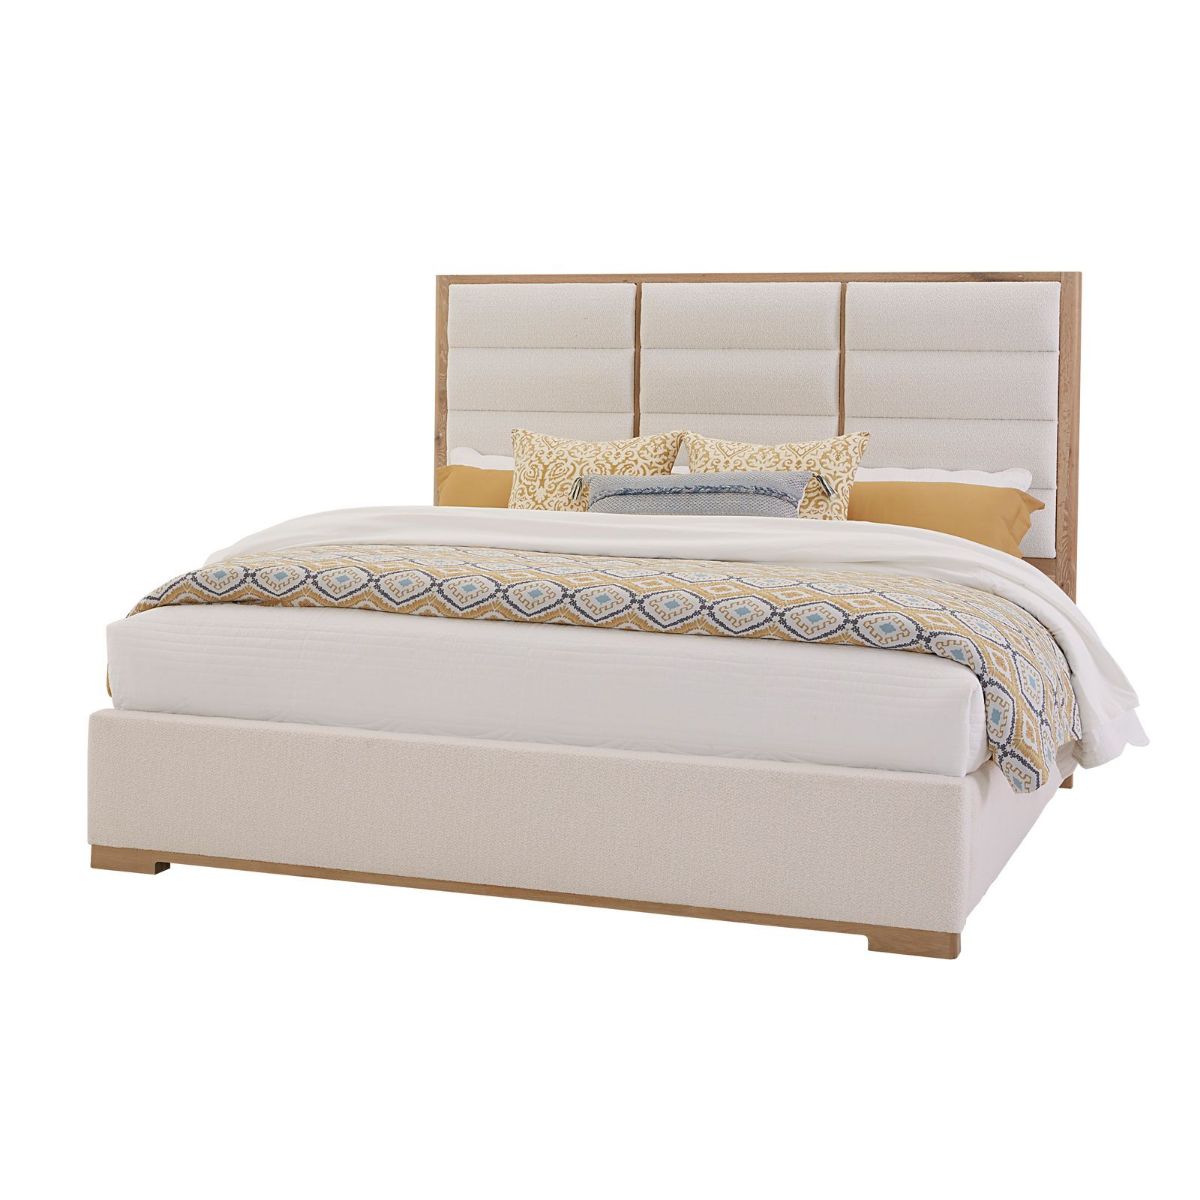 Picture of Erin’s Upholstered Queen Bed